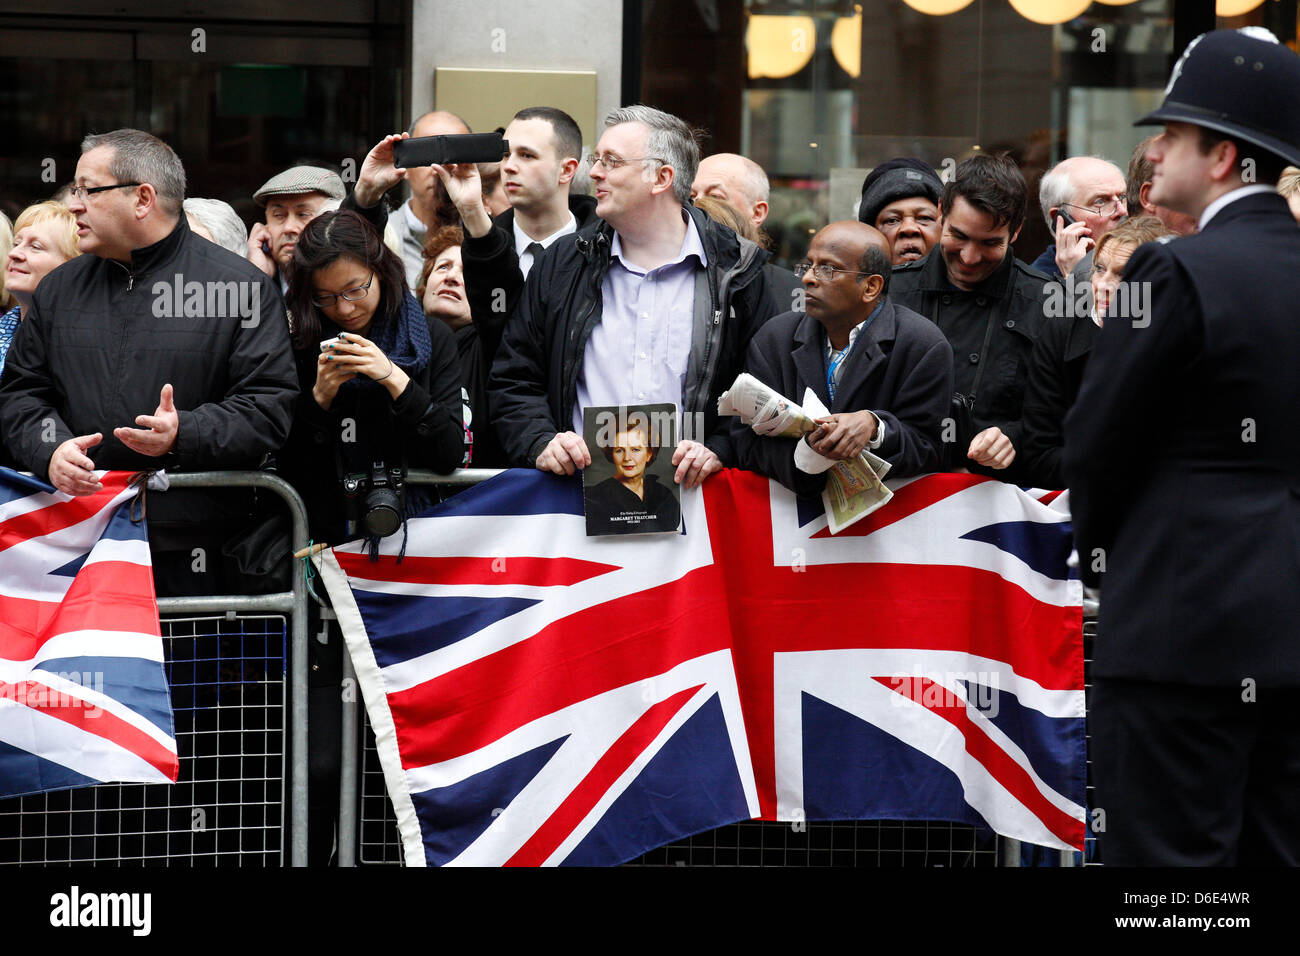 London, UK. 17th of April 2013.  The funeral of former prime minister Margaret Thatcher was held at St. Paul's Cathedral this morning. People were holding flags, flowers as well as pictures of Margaret Thatcher. Credit: Lydia Pagoni/Alamy Live News Stock Photo